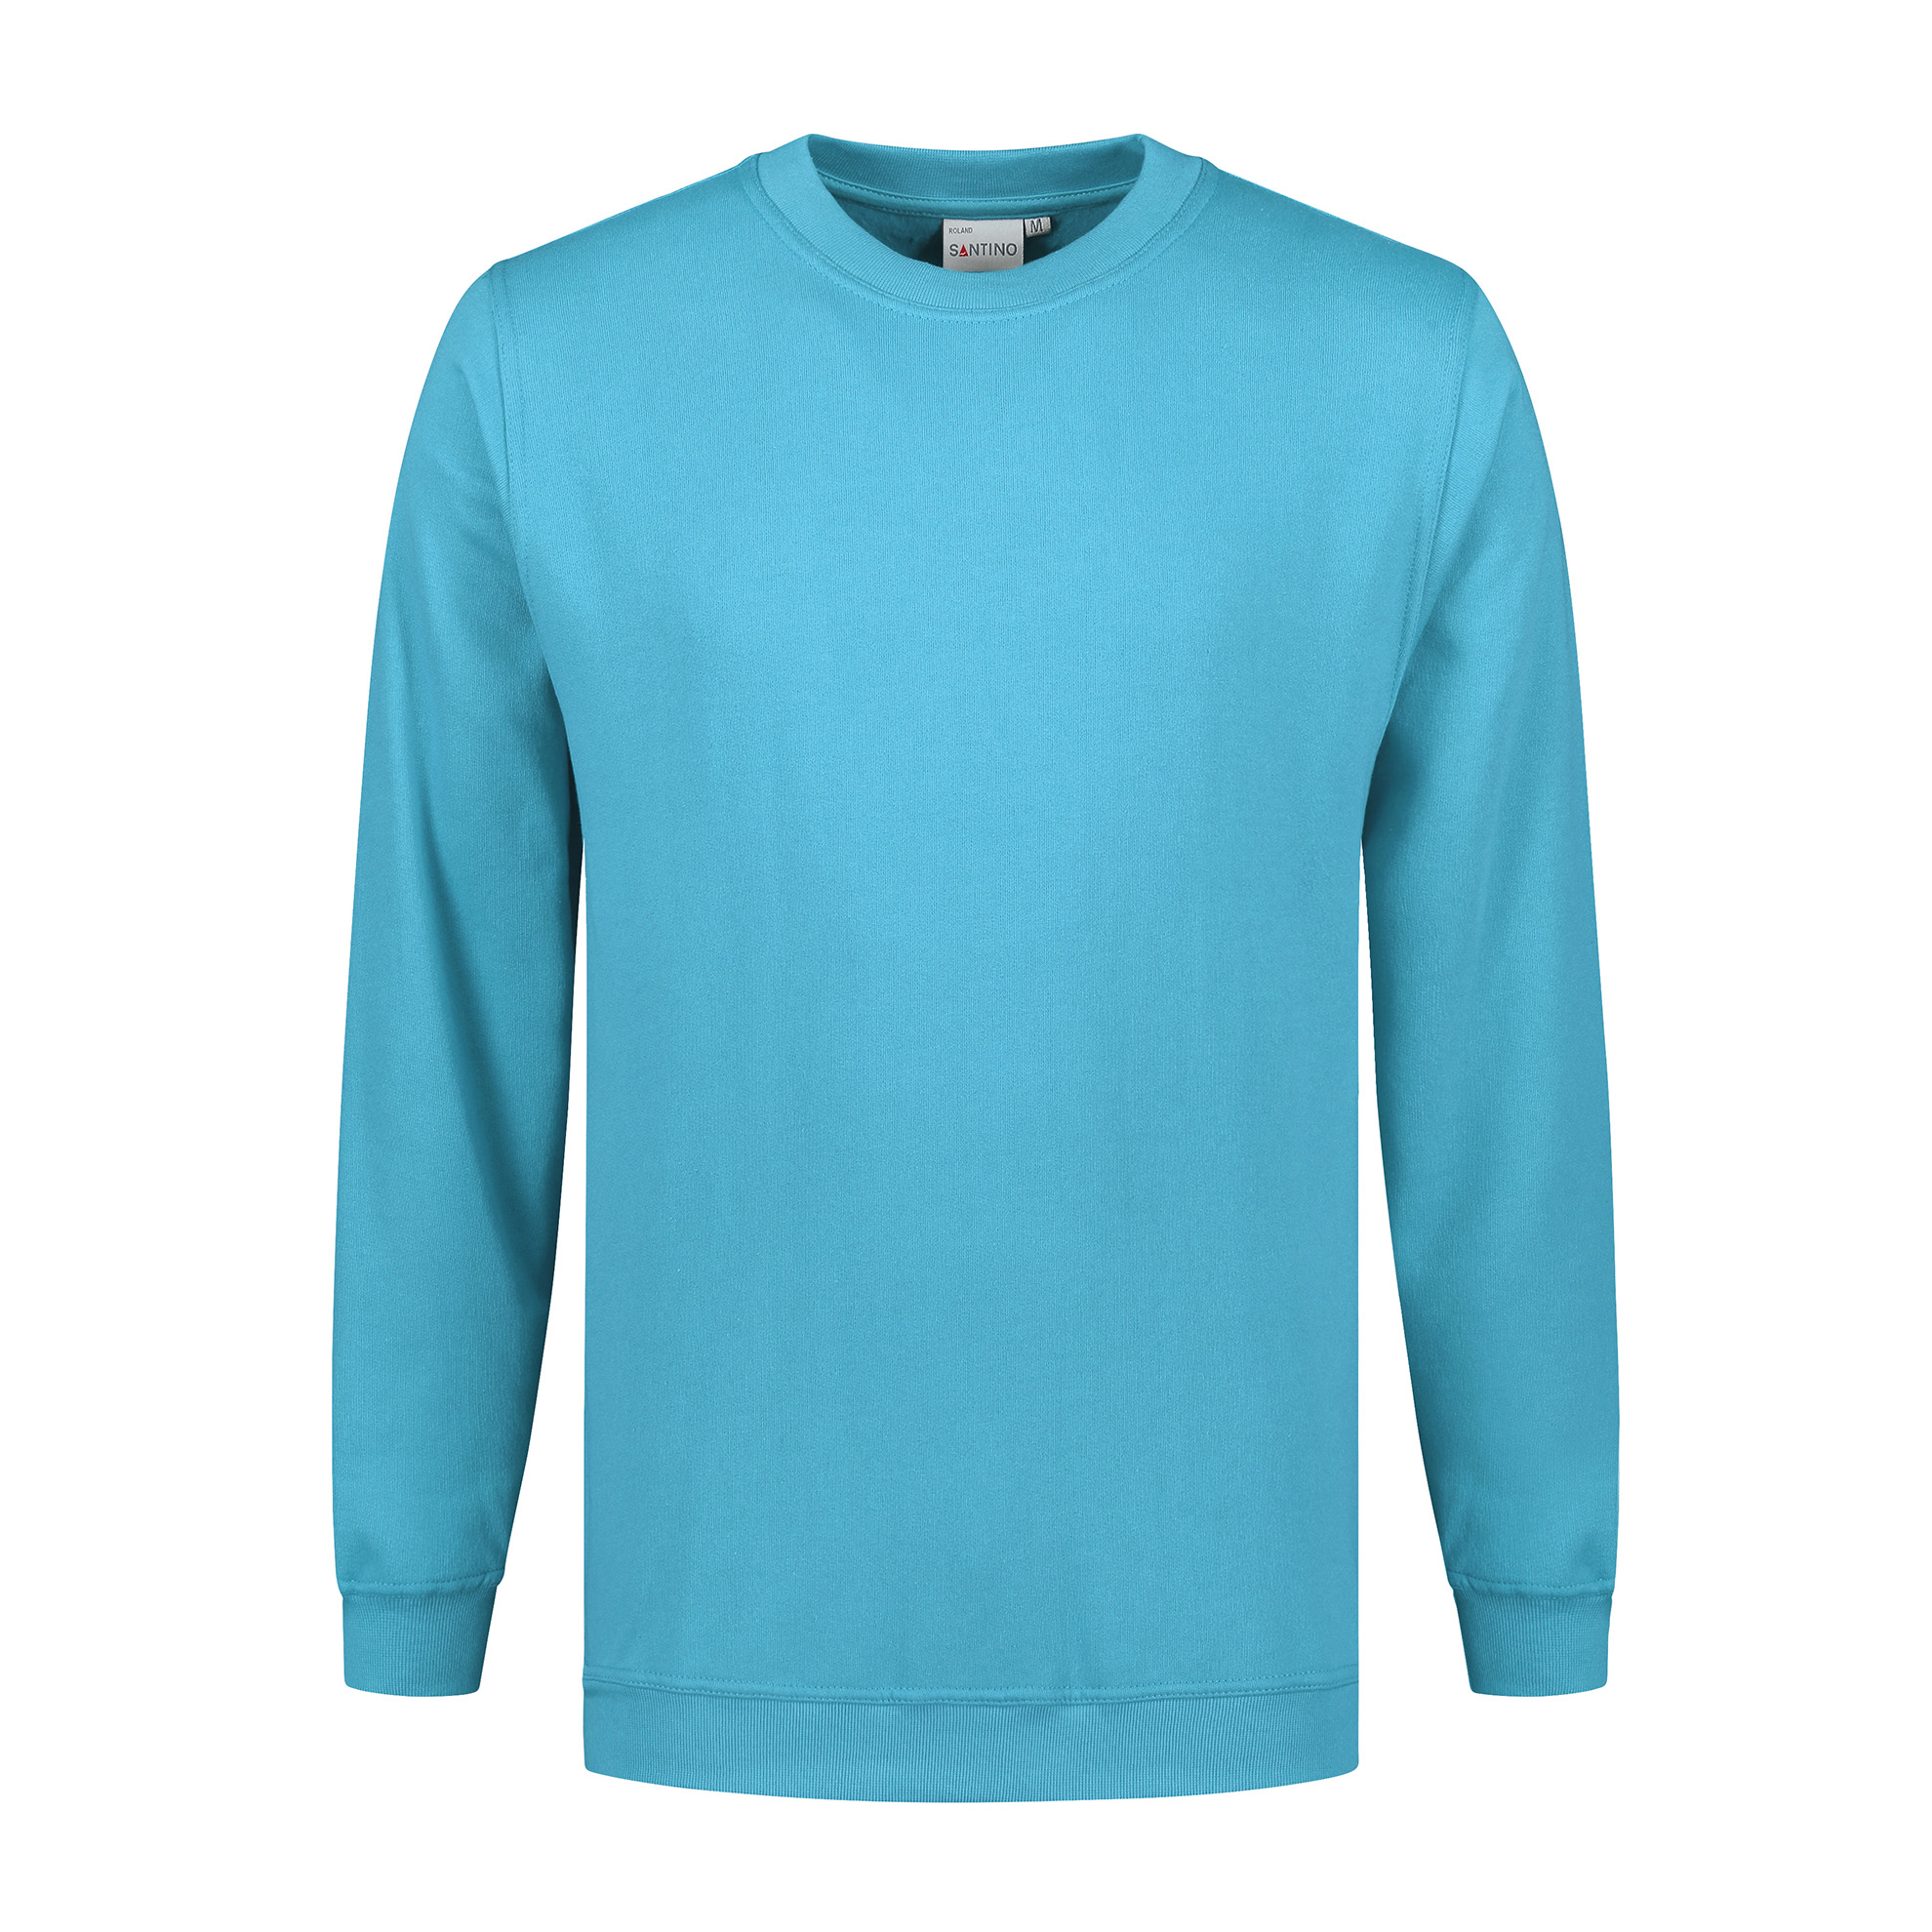 Sweater ROLAND - front